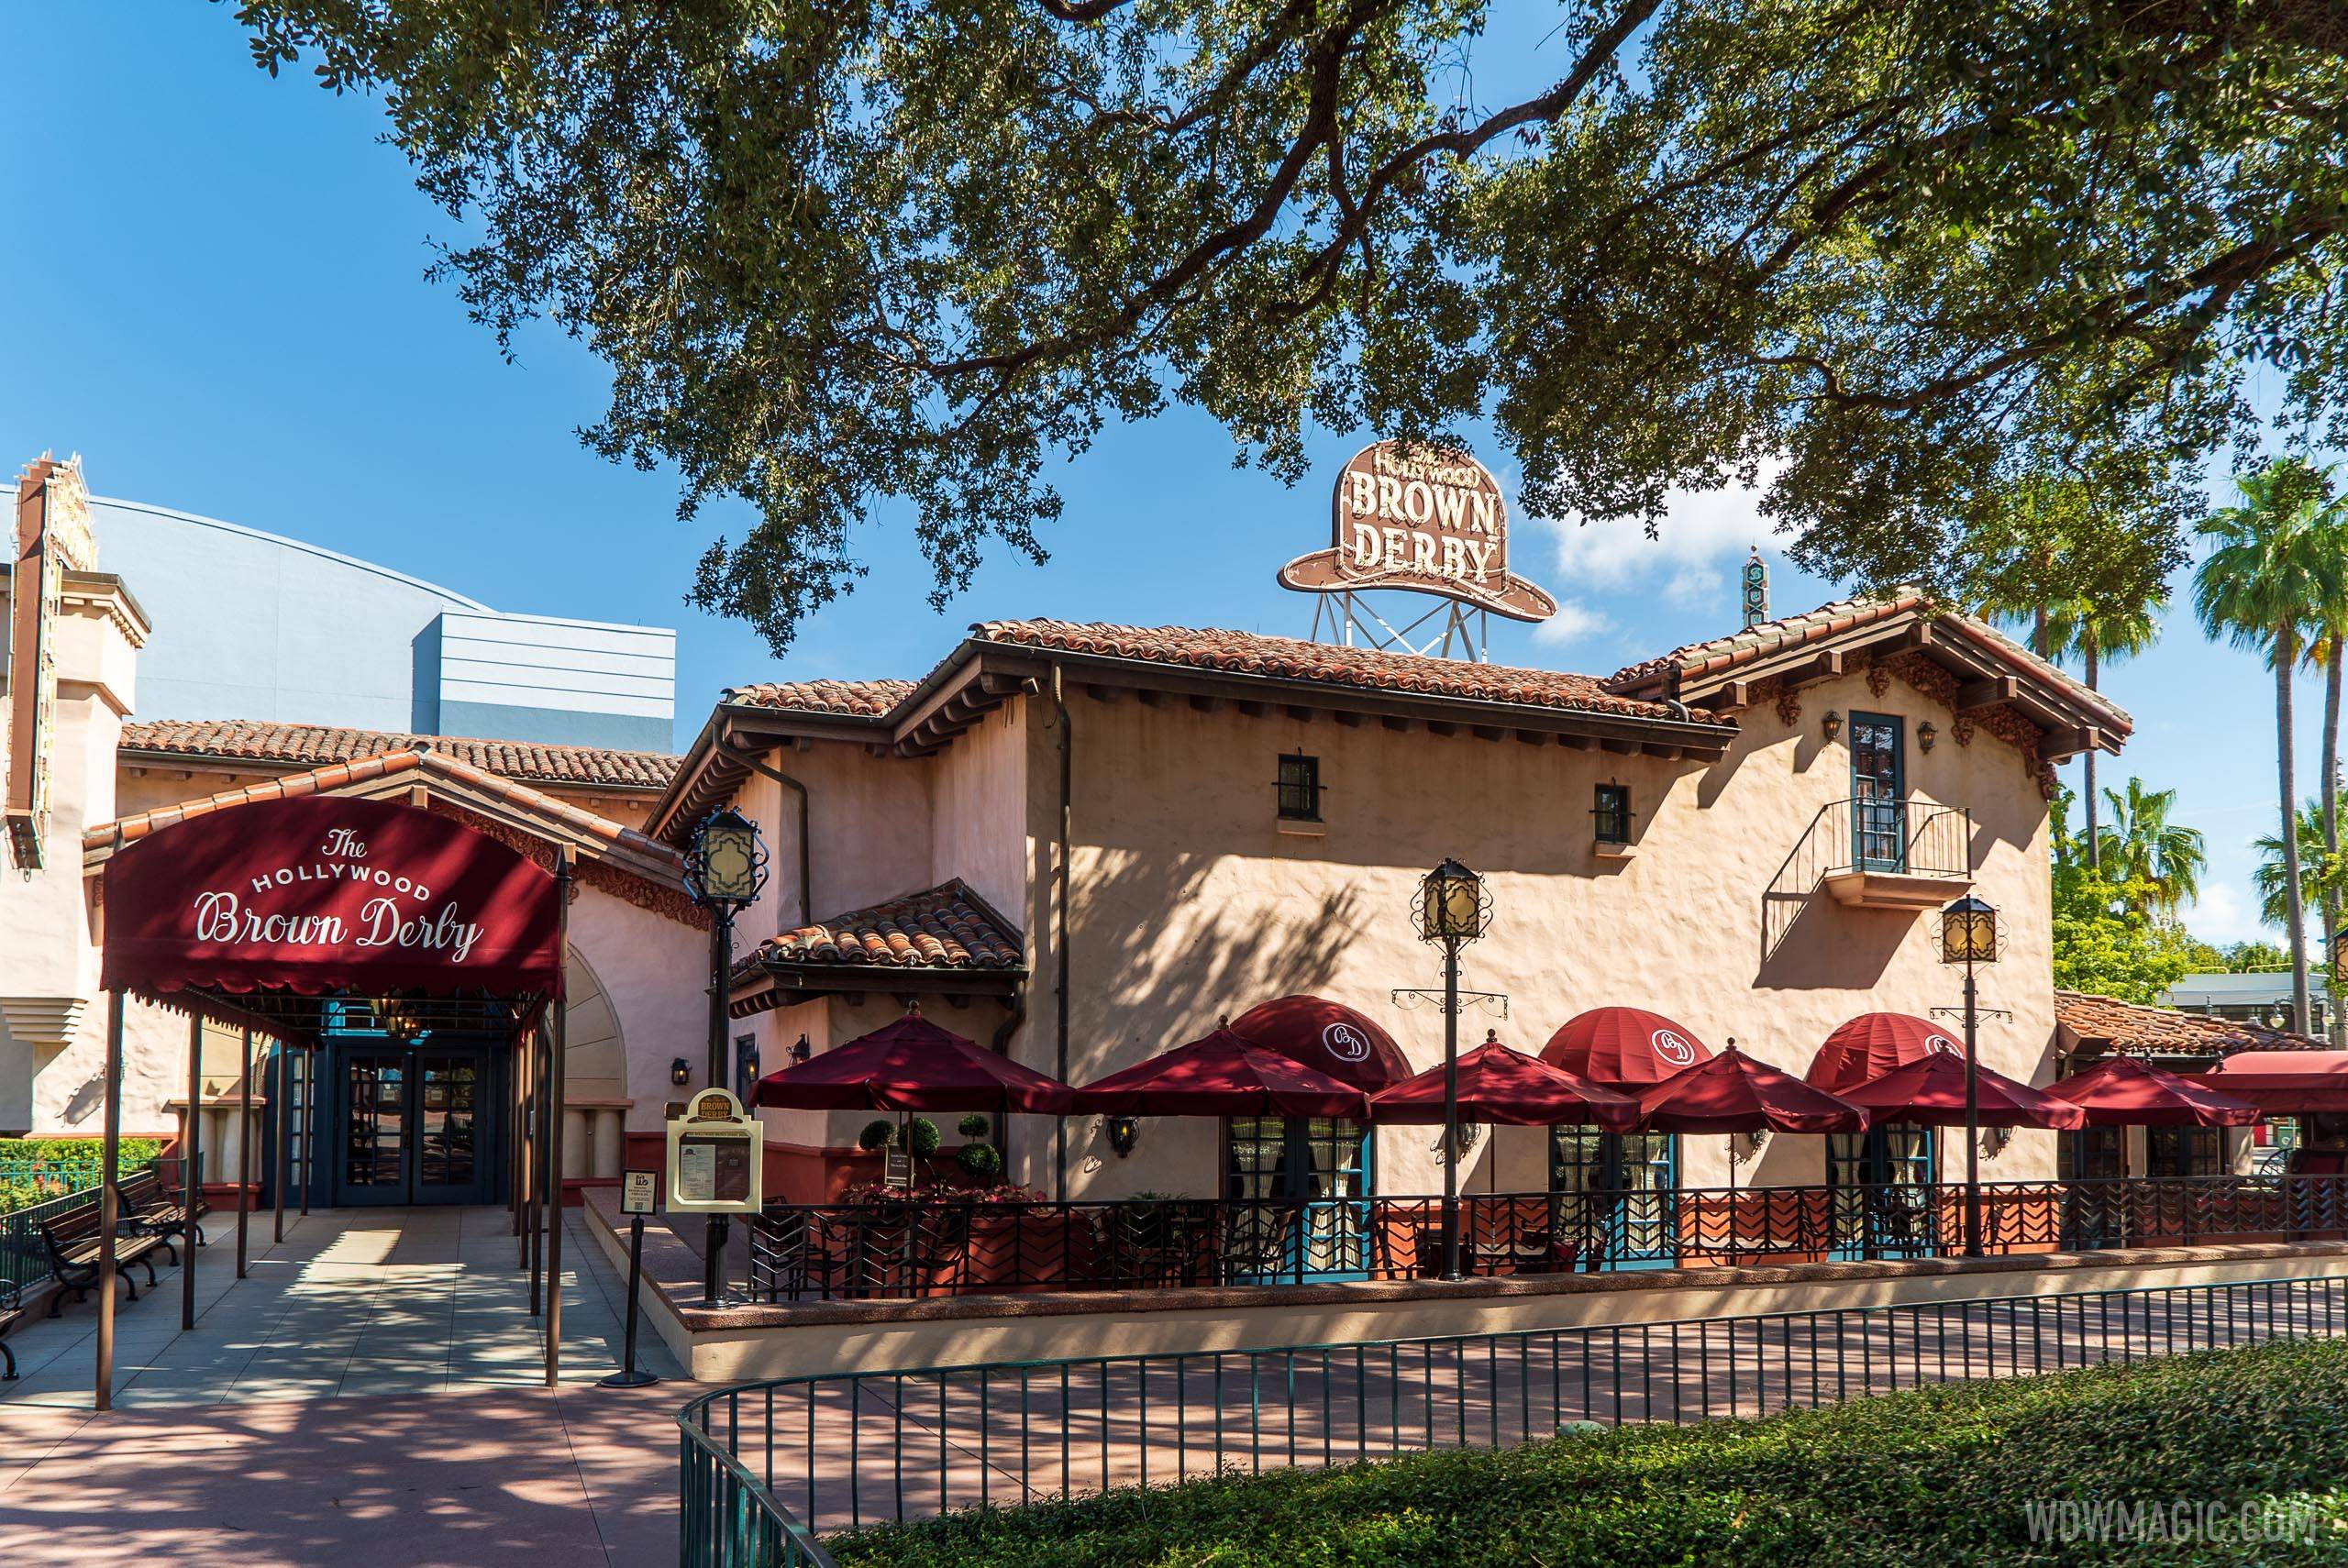 Most Walt Disney World restaurants can be used with the new Disney Dining Promo Card offer